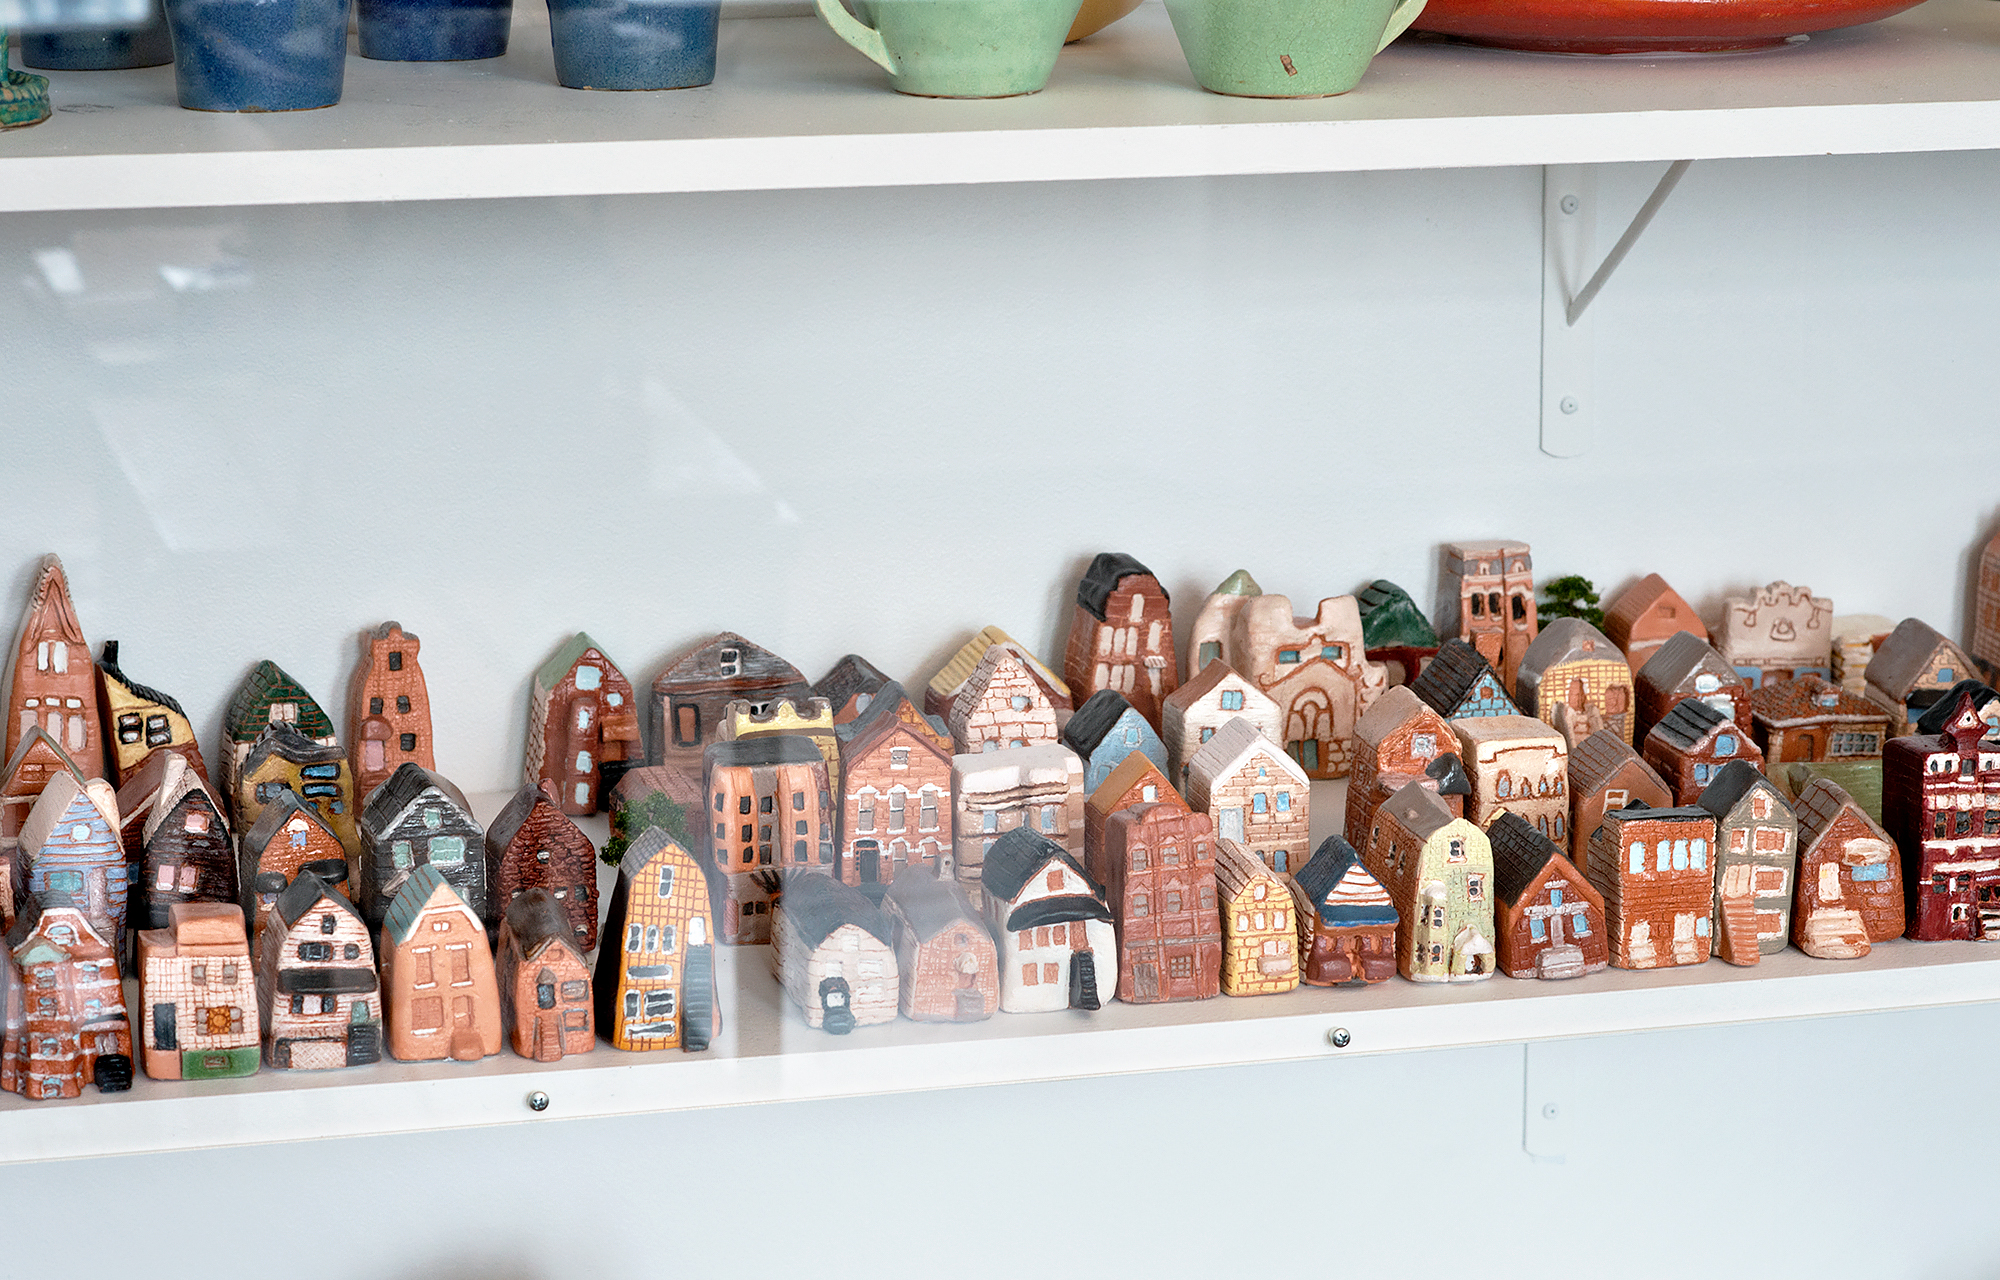 Image: Detail view of ceramic houses and stores made by Nicole Marroquin’s students at Benito Juarez Community Academy High School, as seen in a display case at Hull House. The small ceramics reflect a range of different building styles, from brick to colorful siding, and single-family homes to apartment complexes. They are arranged in dense grids similar to the layout of Chicago neighborhoods. Photo by Greg Ruffing.